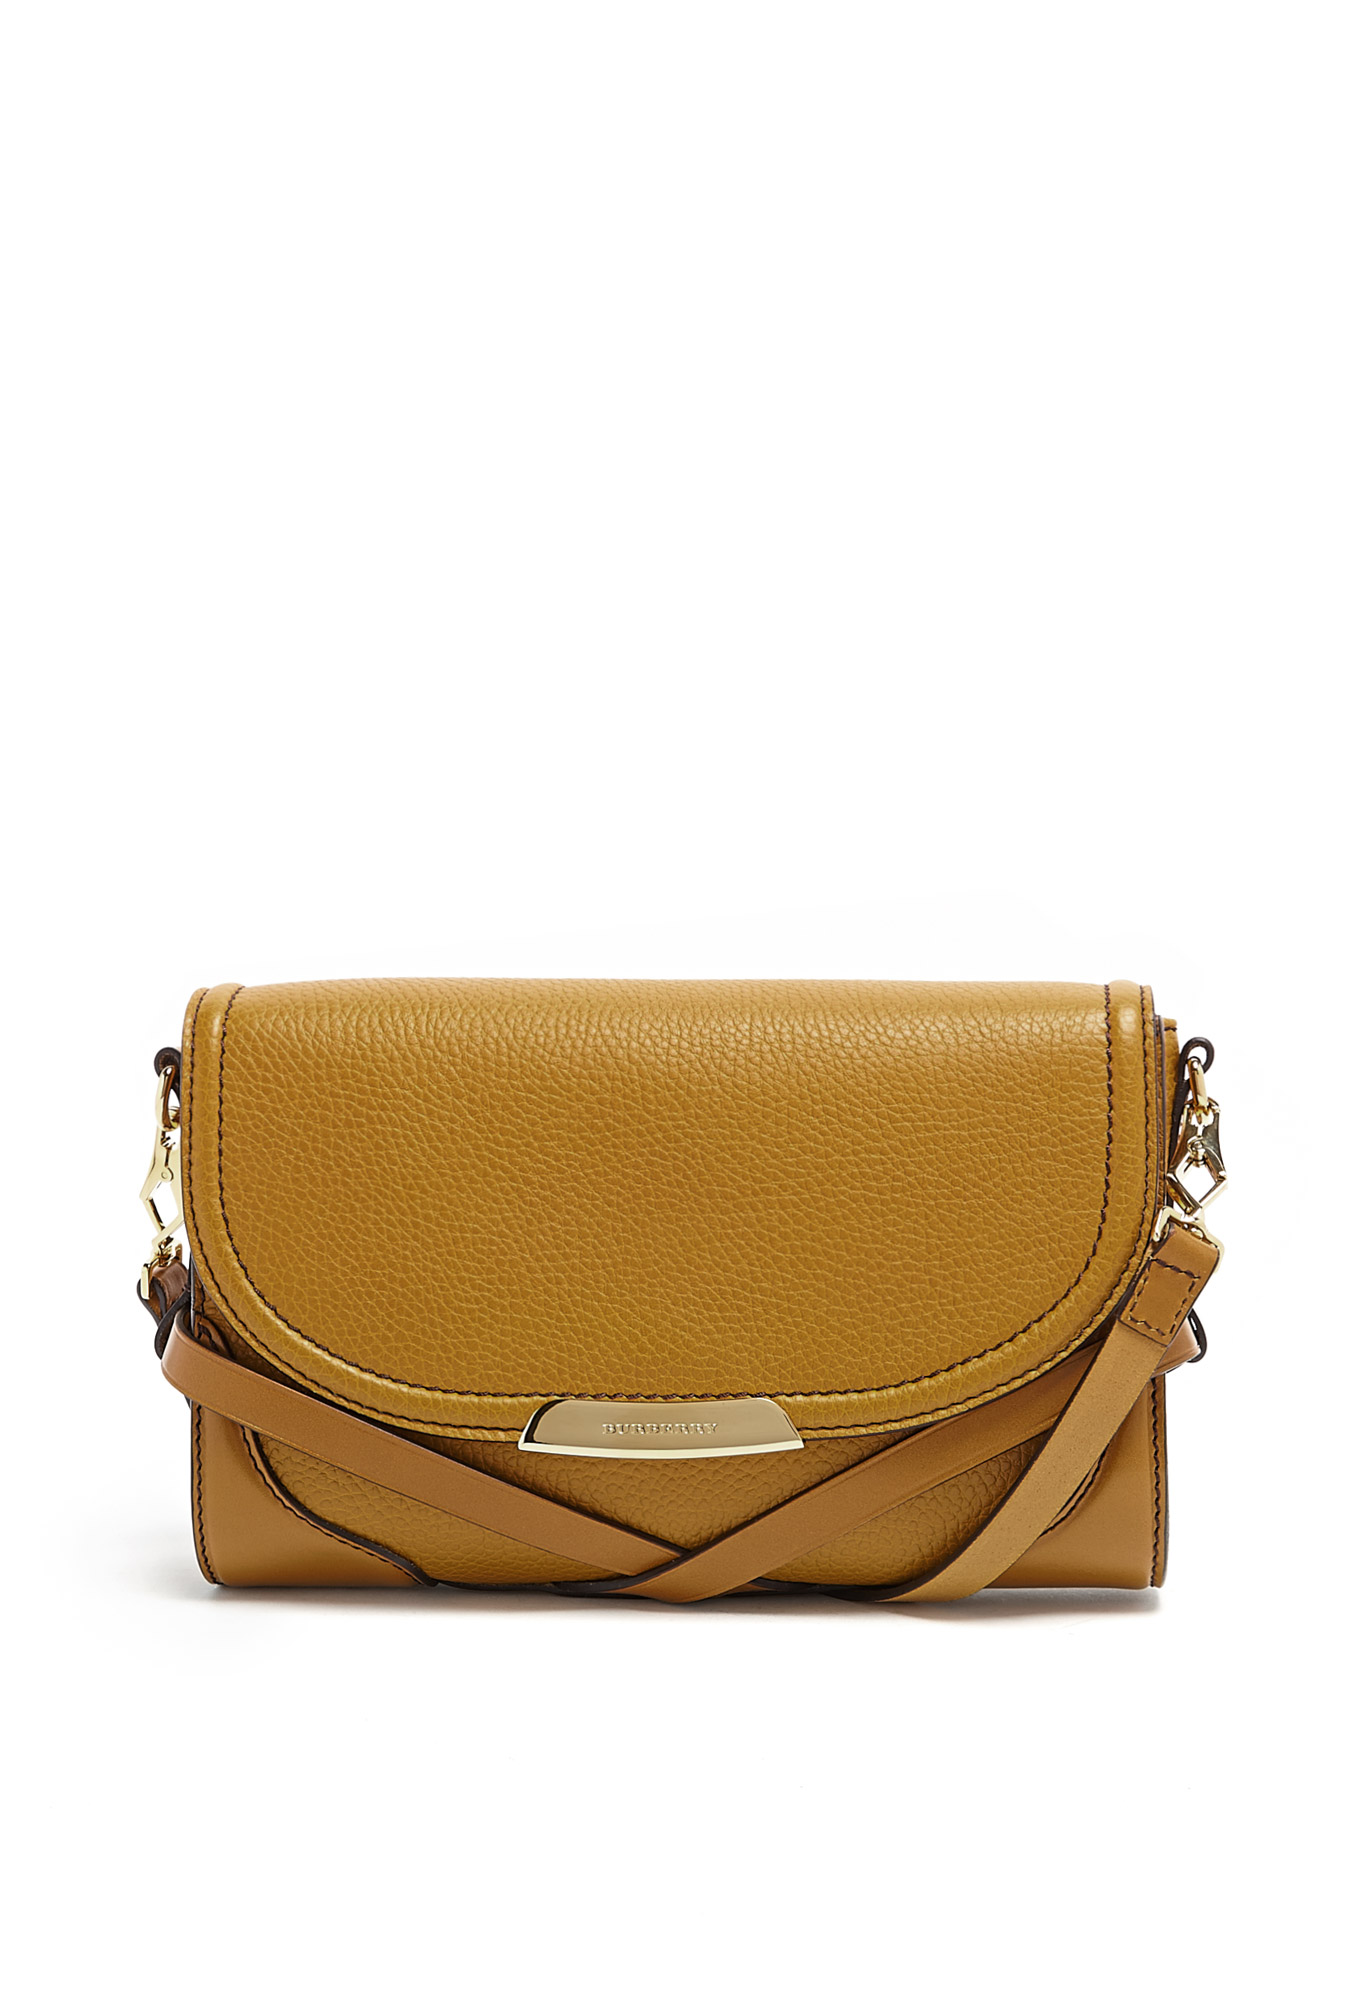 Burberry Gold Freesia Leather Small Abbott Crossbody Bag in Yellow | Lyst